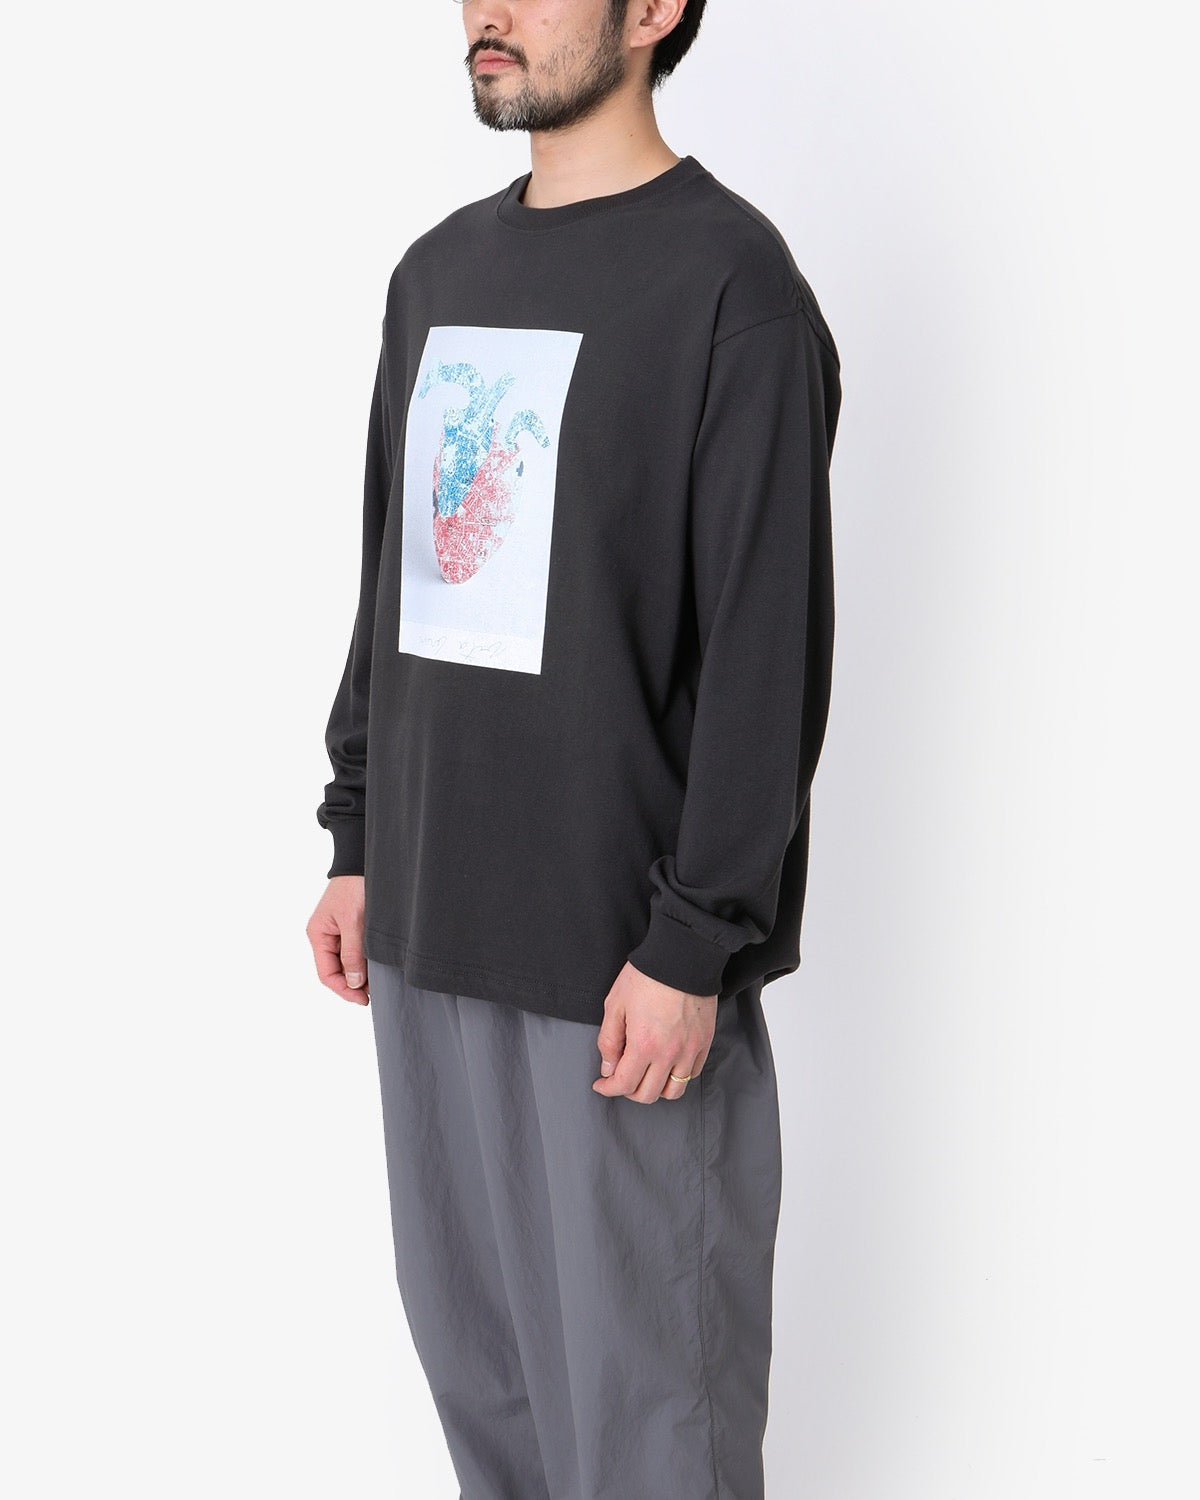 KILLIMAN JAH LOW WORKS COLLAGE 02 LONG SLEEVE T-SHIRT